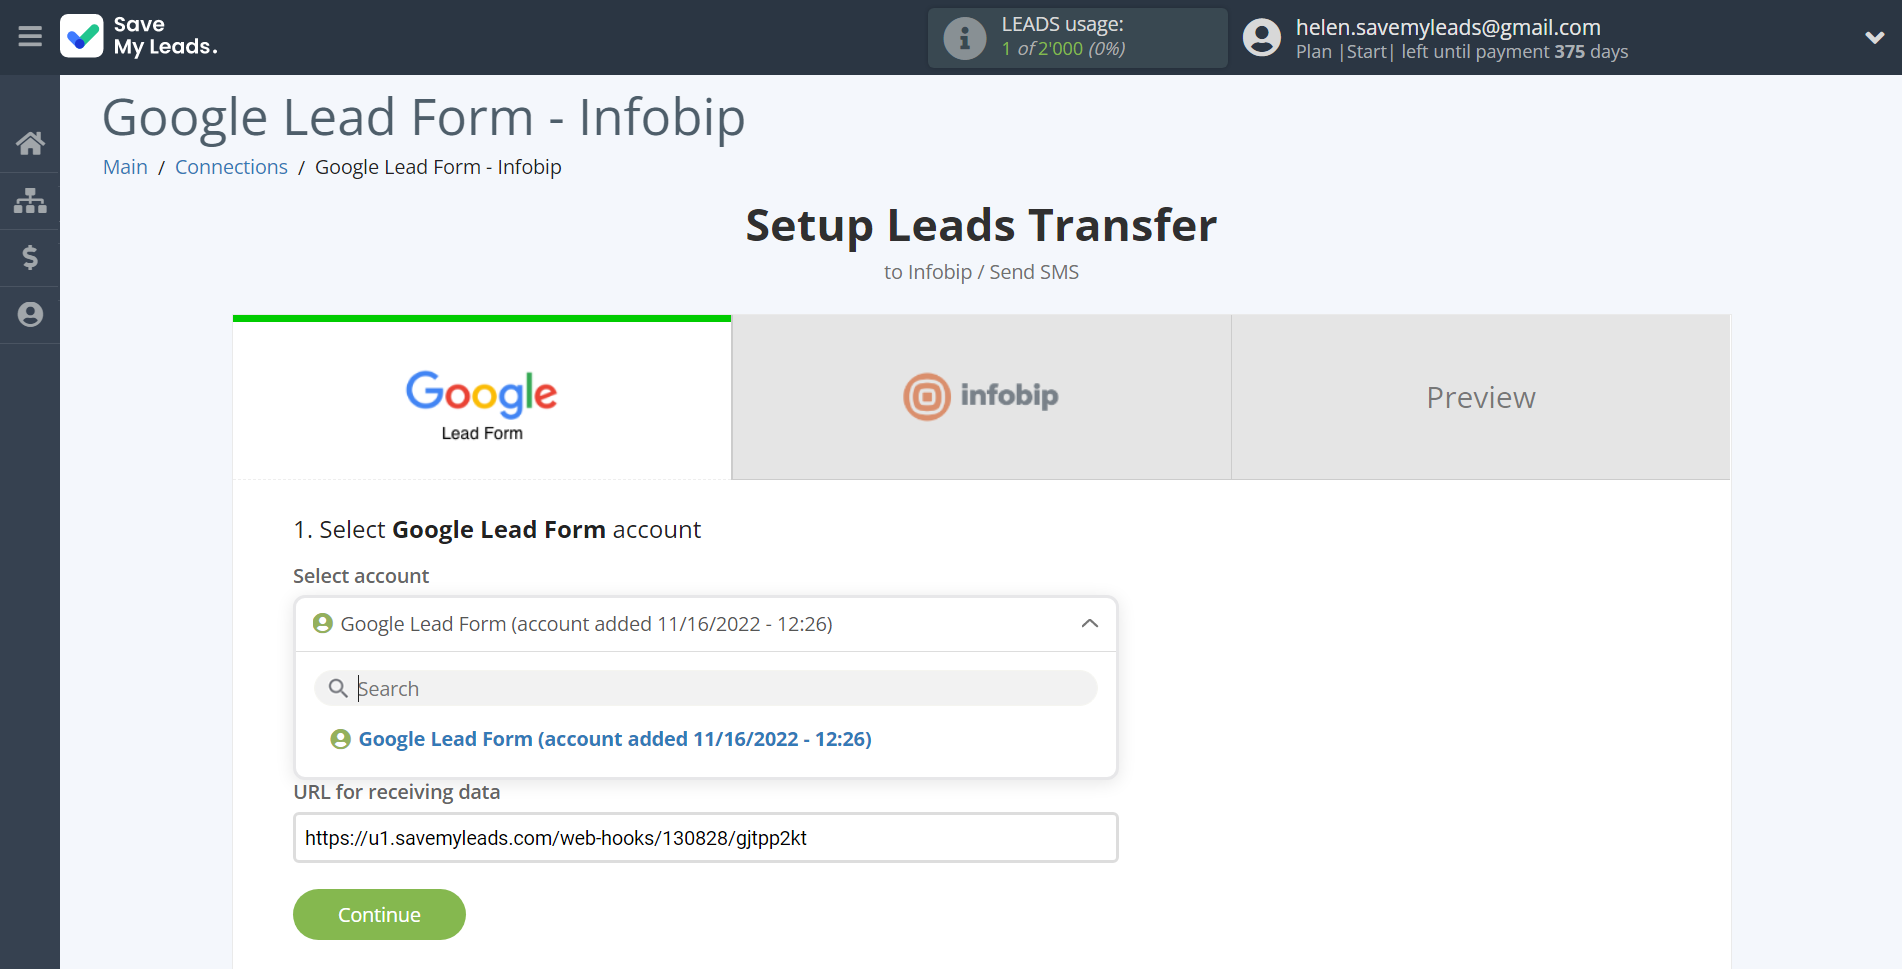 How to Connect Google Lead Form with Infobip | Data Source account selection